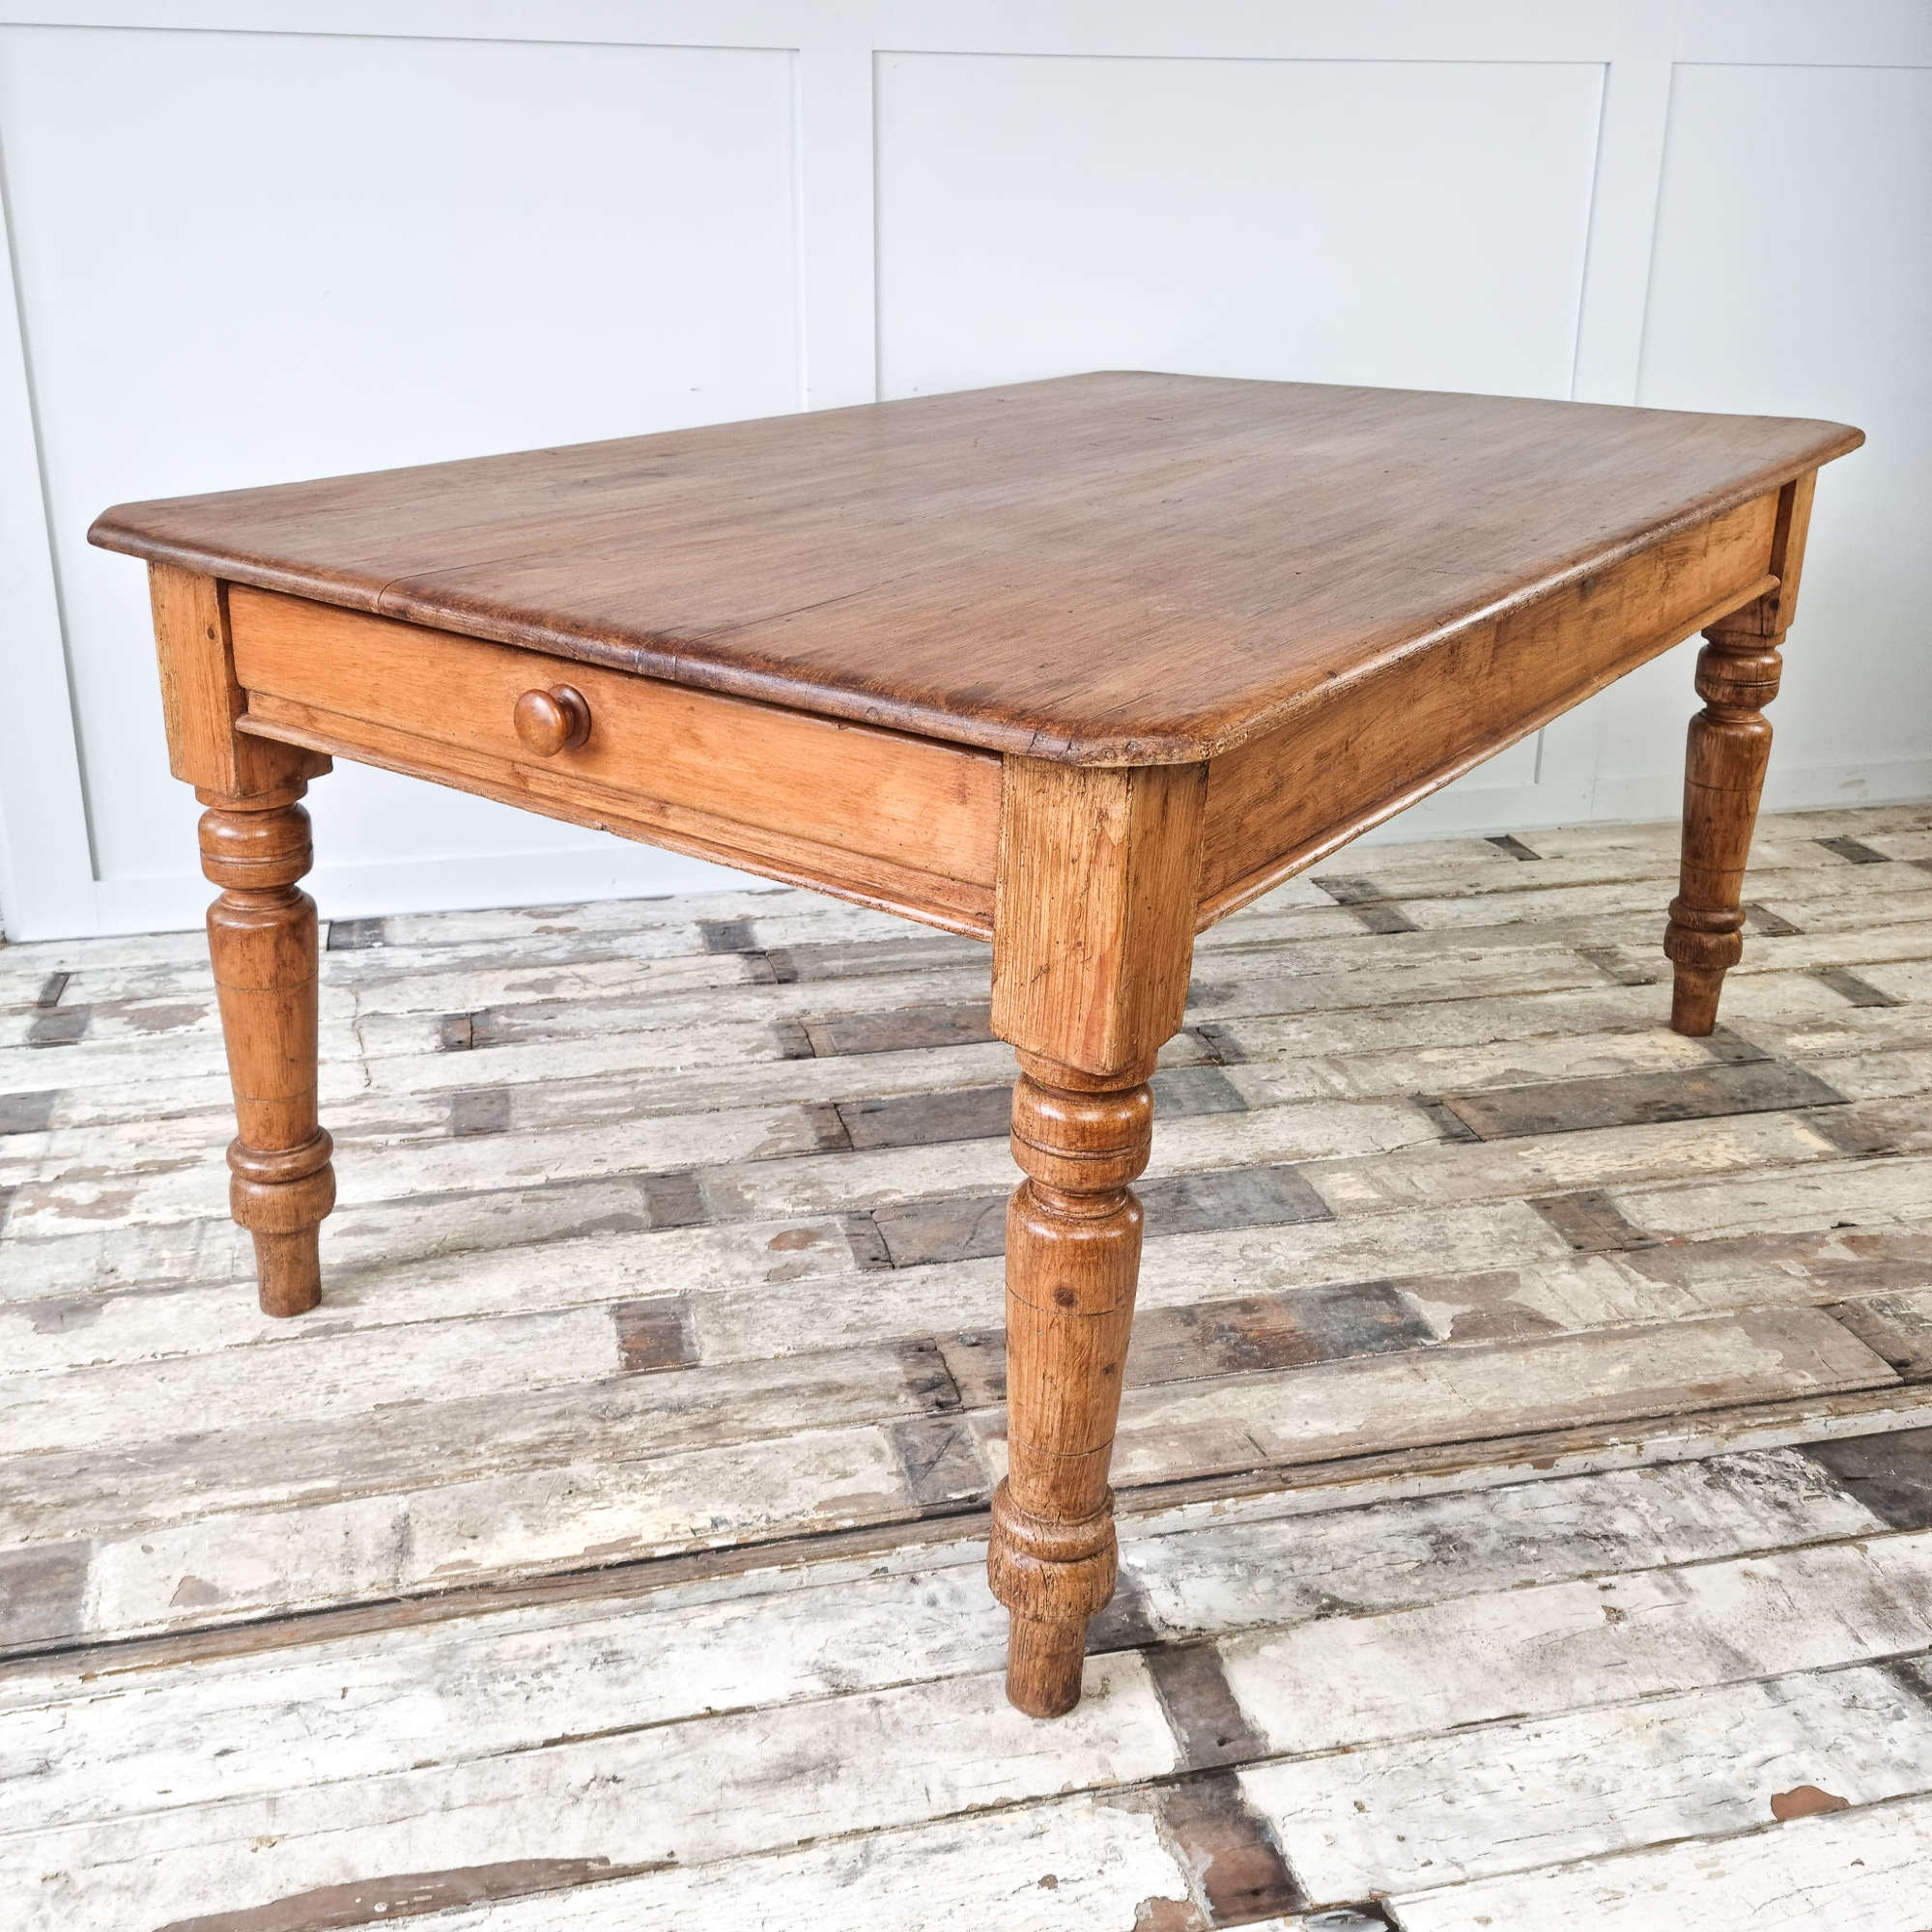 Large Victorian pine country farmhouse kitchen table, dining table, prep table